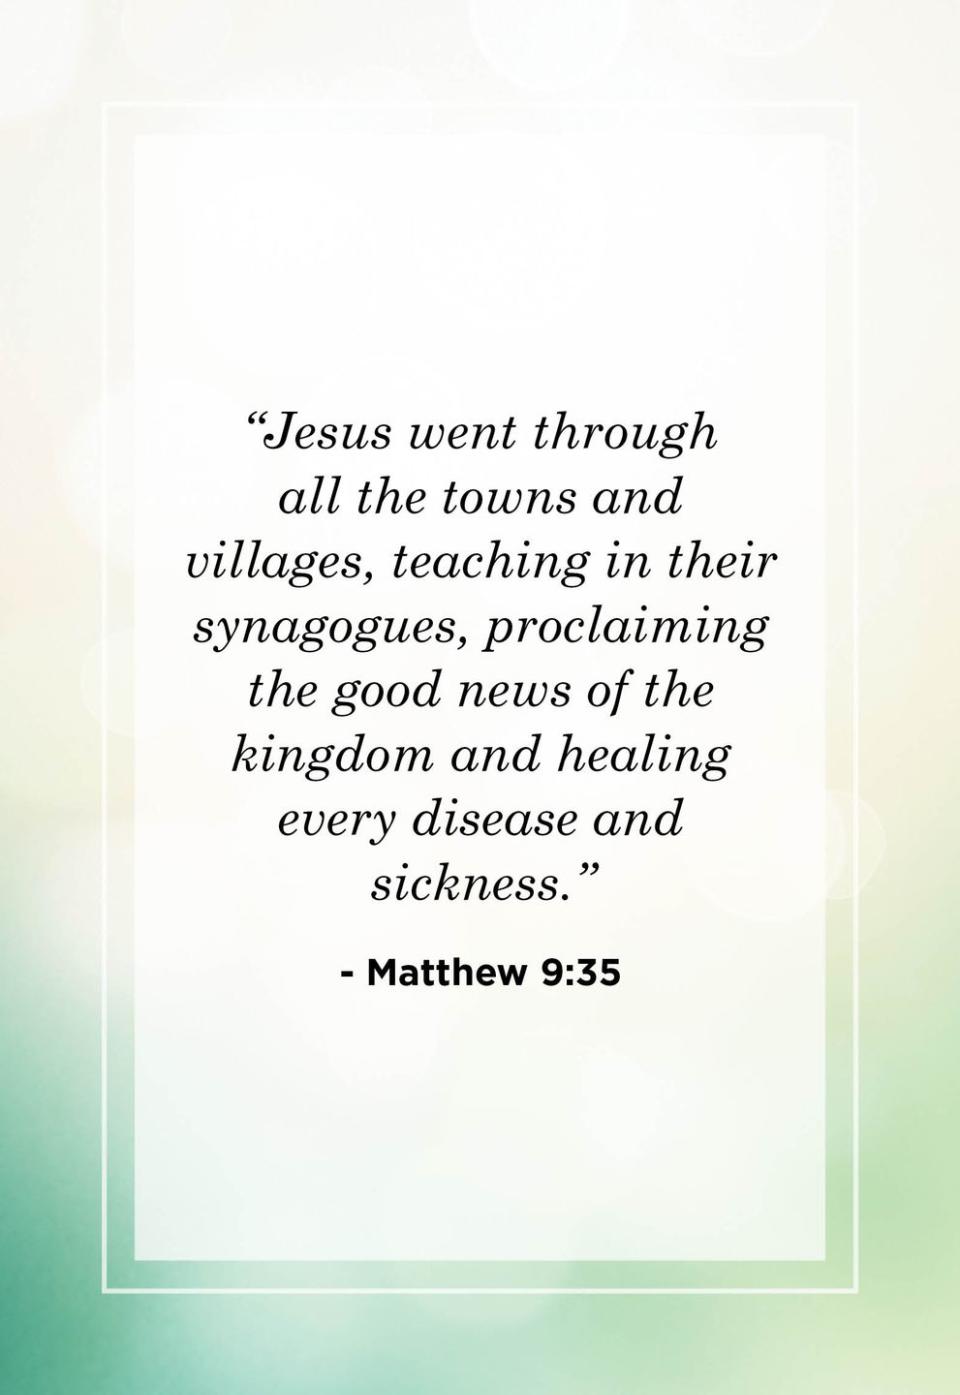 <p>"Jesus went through all the towns and villages, teaching in their synagogues, proclaiming the good news of the kingdom and healing every disease and sickness."</p>